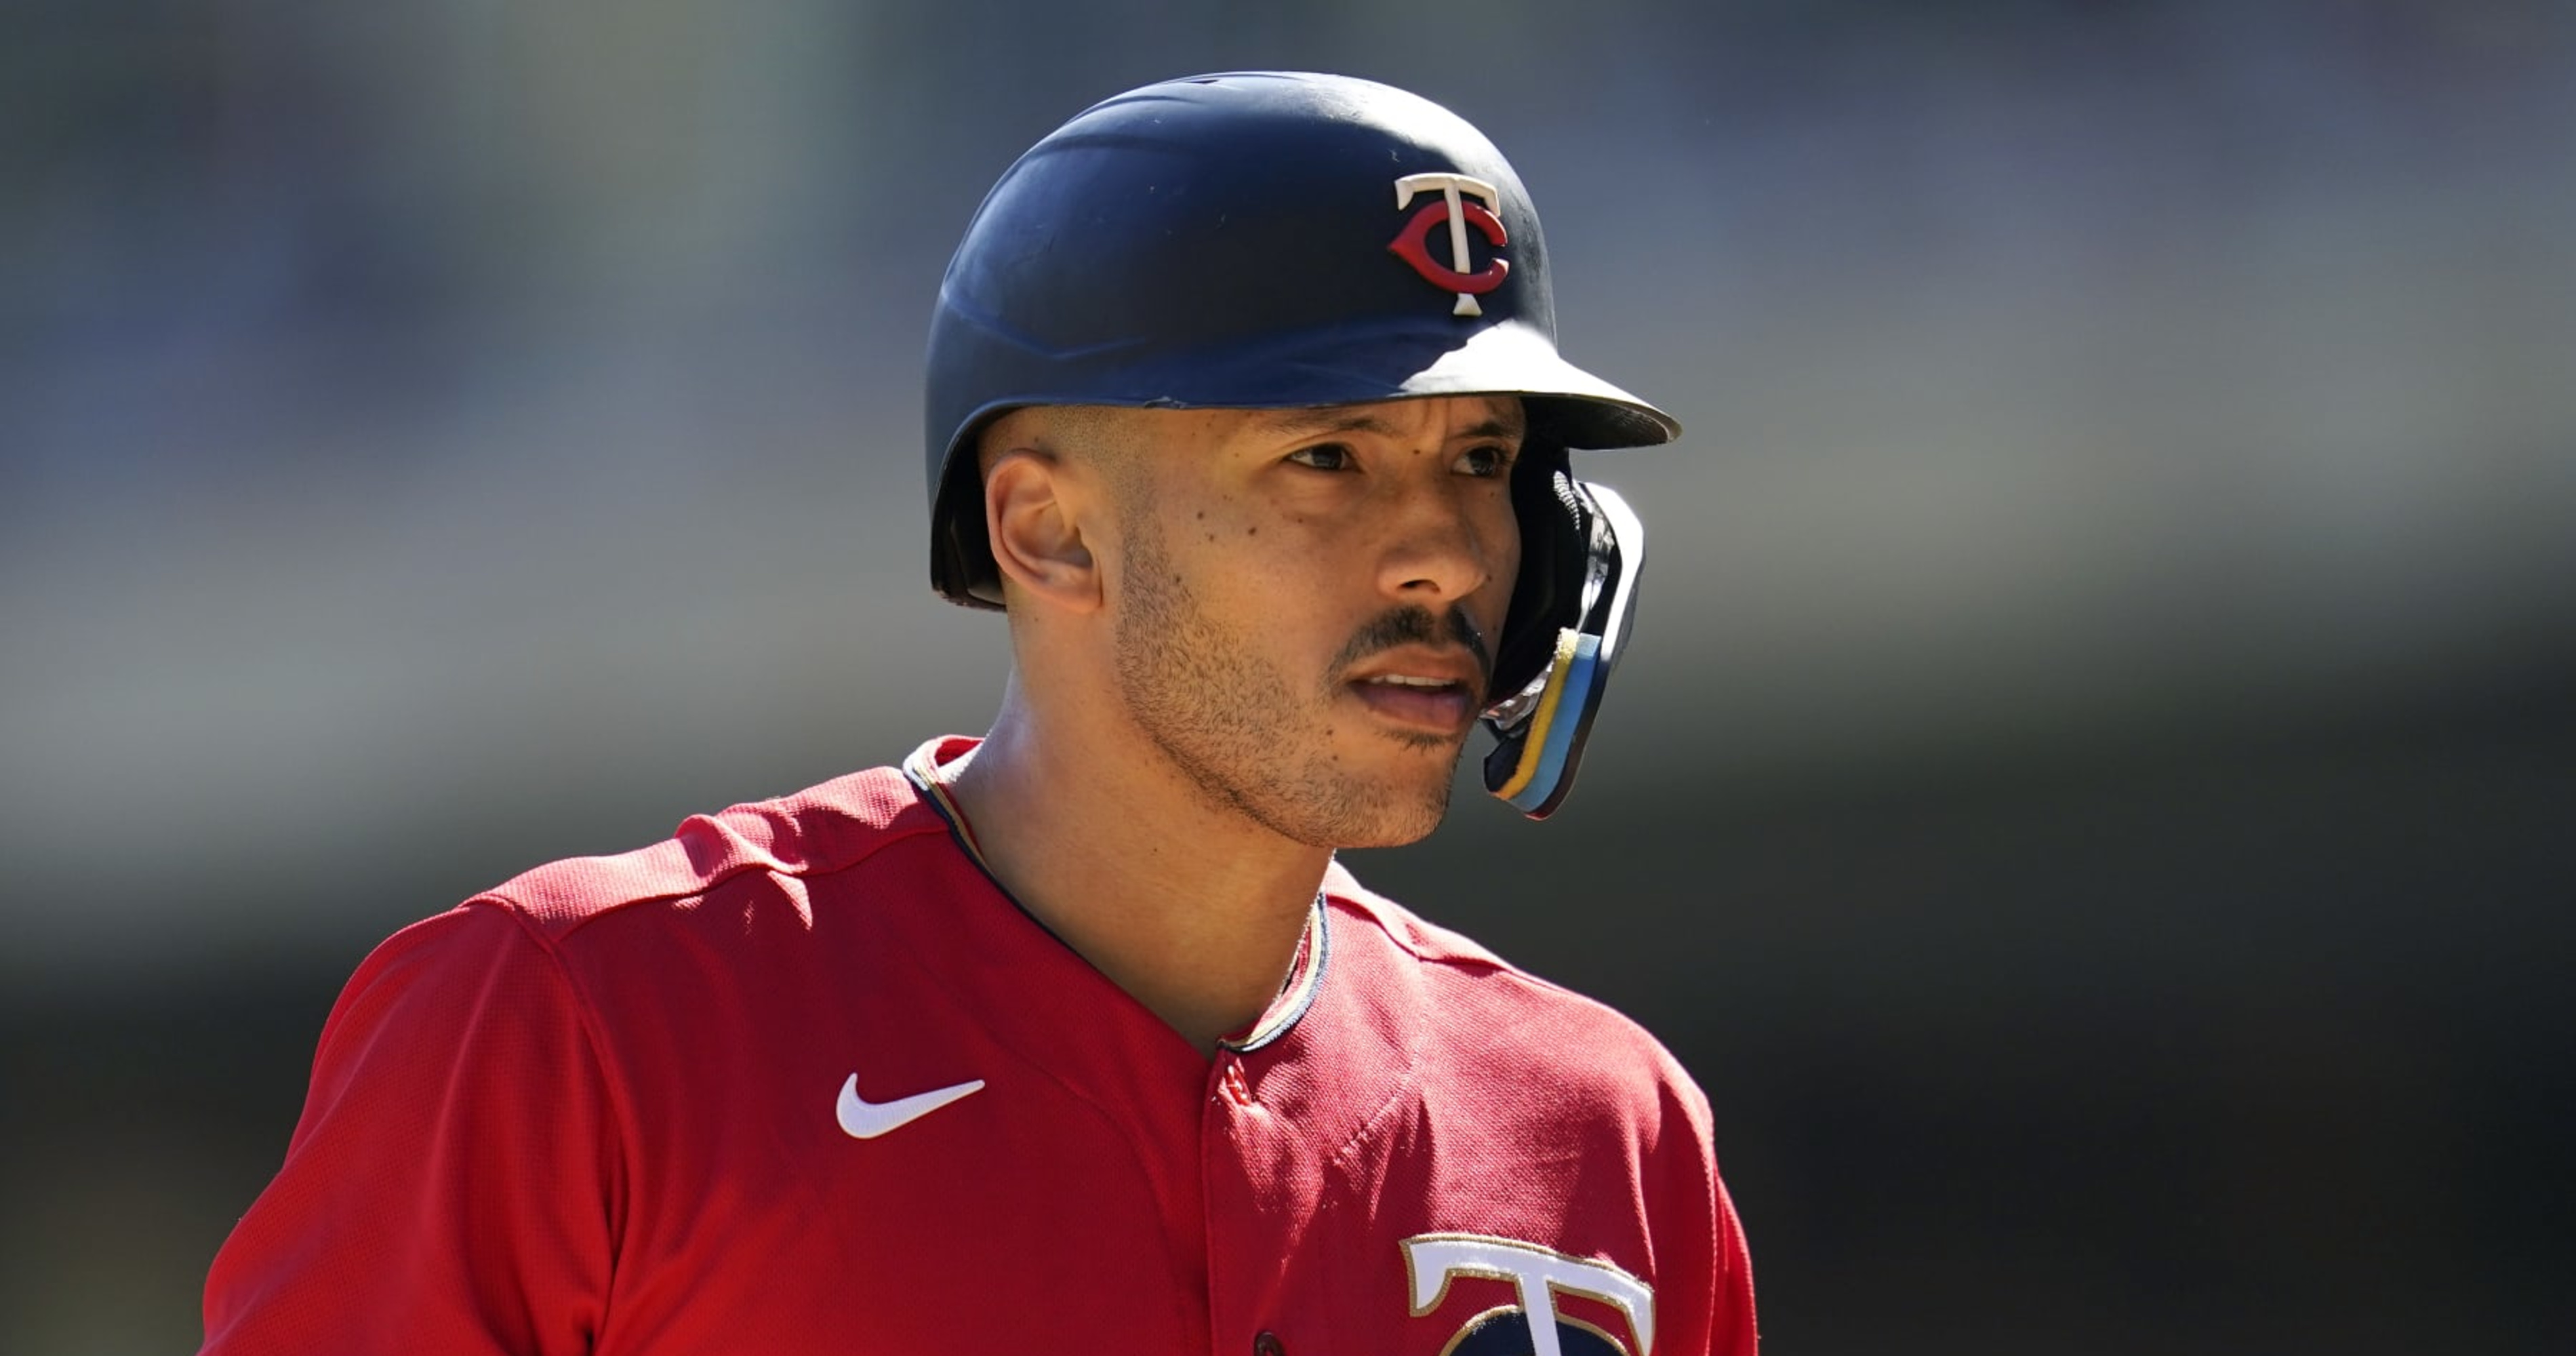 Boras: Giants wouldn't seal Carlos Correa deal, so he called Mets